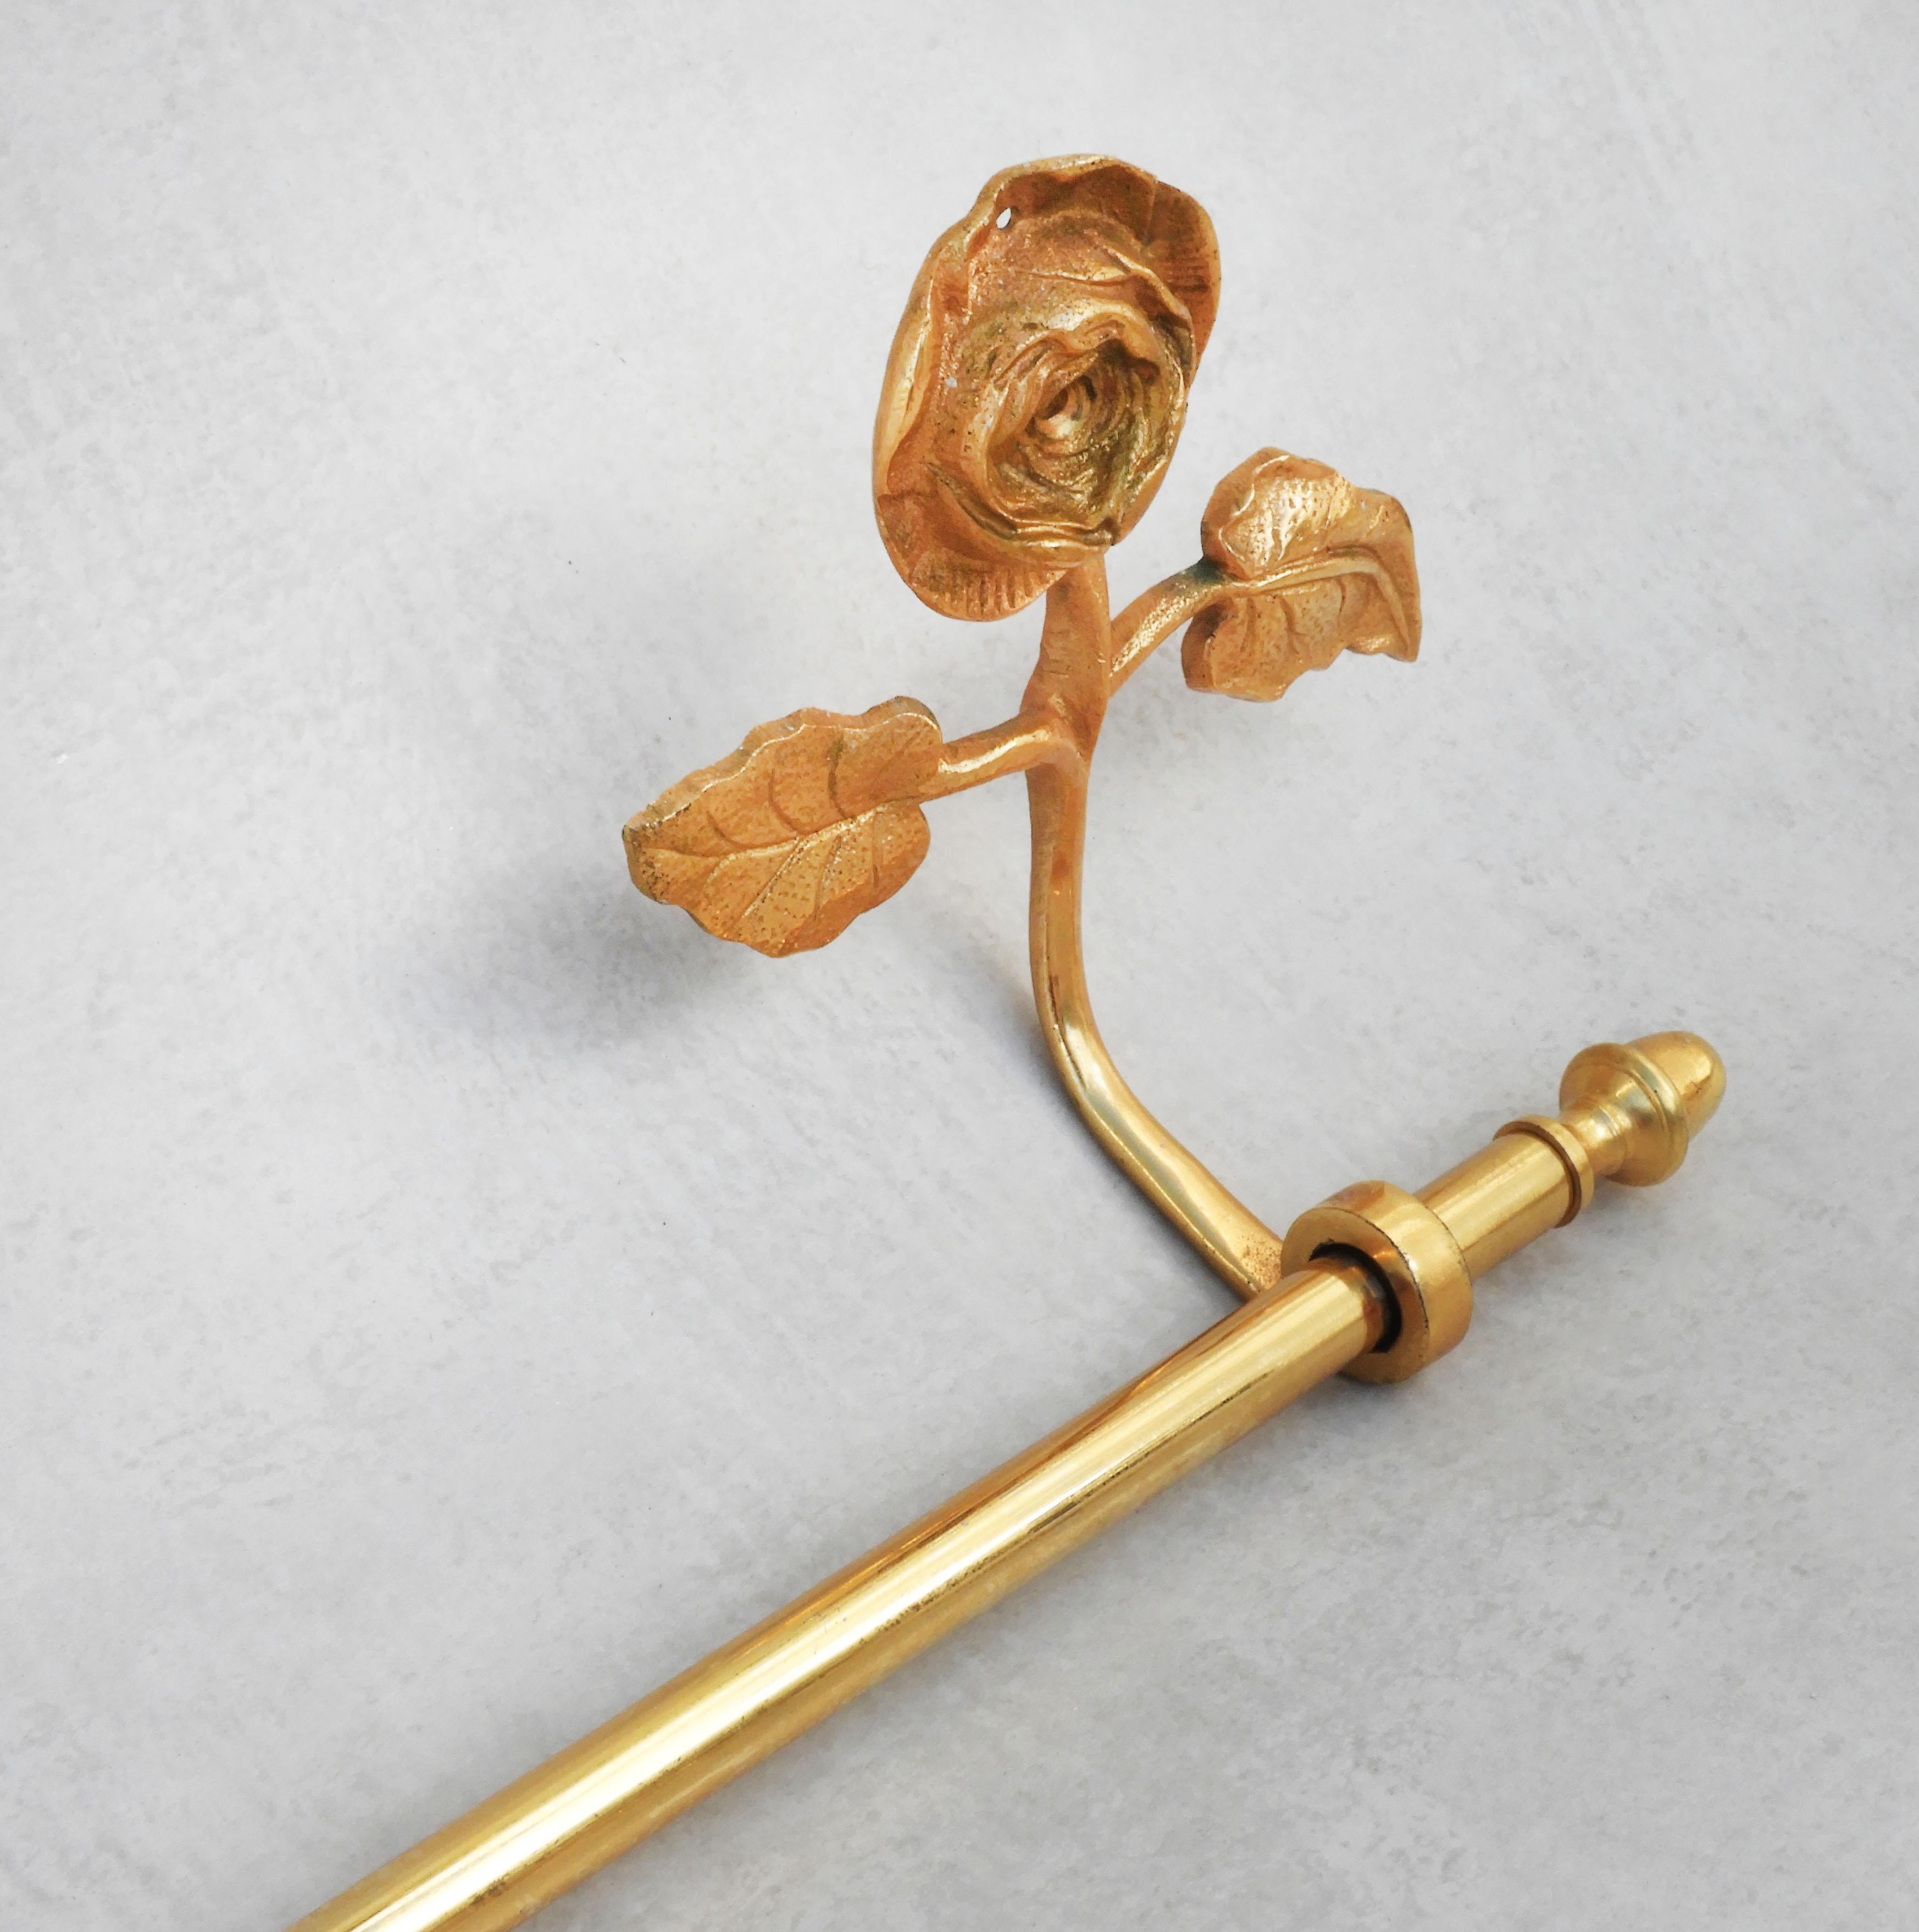 Gilt French Mid Century Rose Flower Towel Bar or Rail C1950s FREE SHIPPING